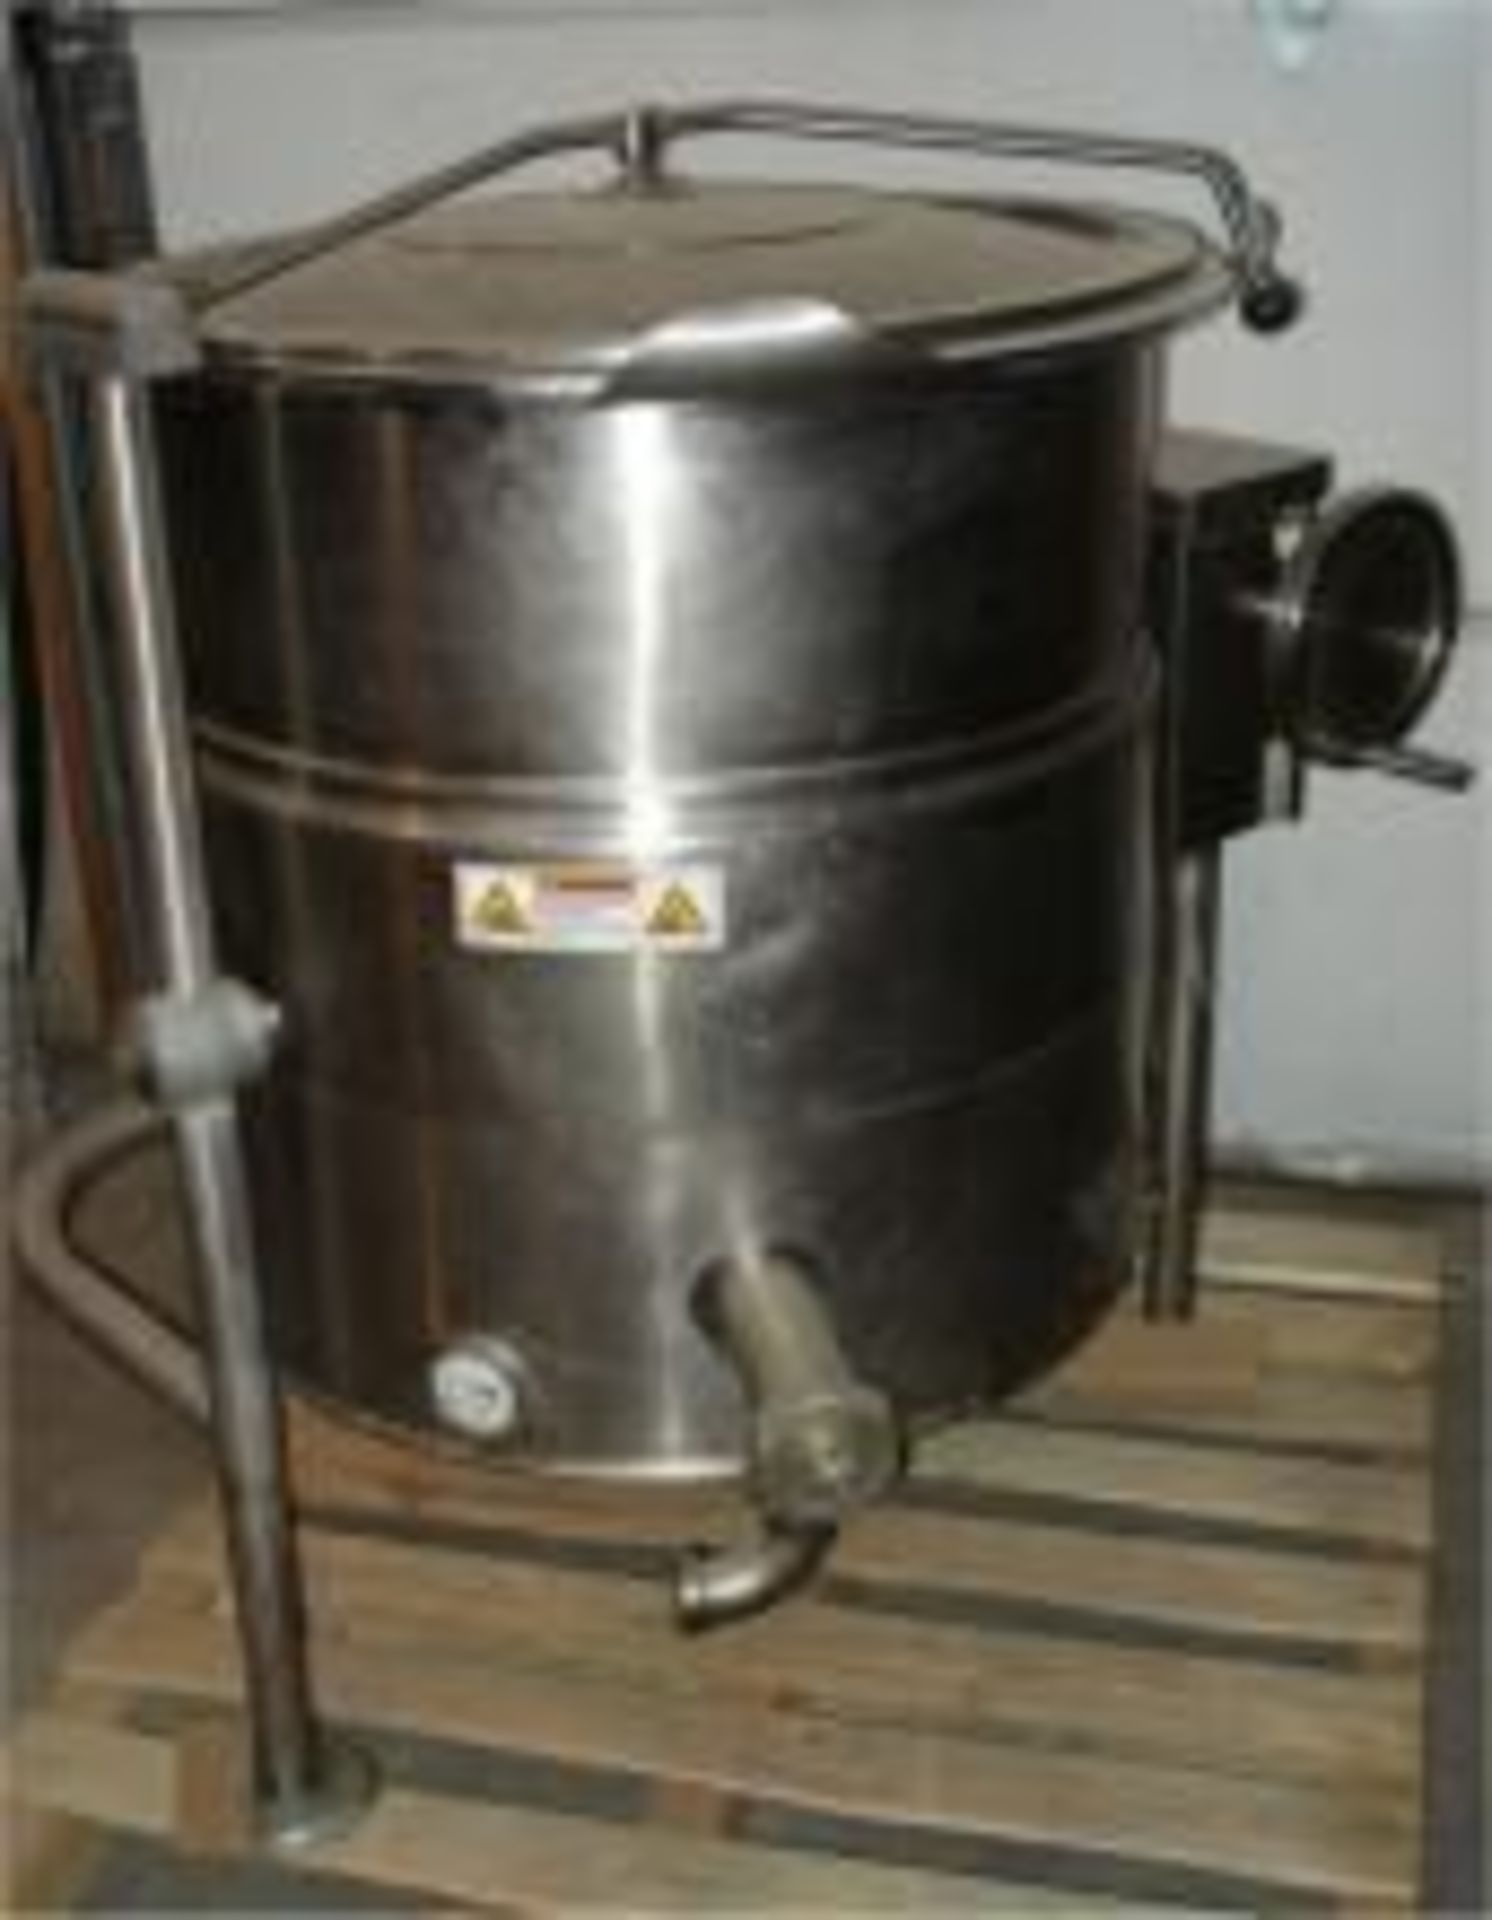 Used Cleveland 40 Gallon Self Contained Jacketed Tilting Electric Kettle Model KEL-40T.   Electrics: